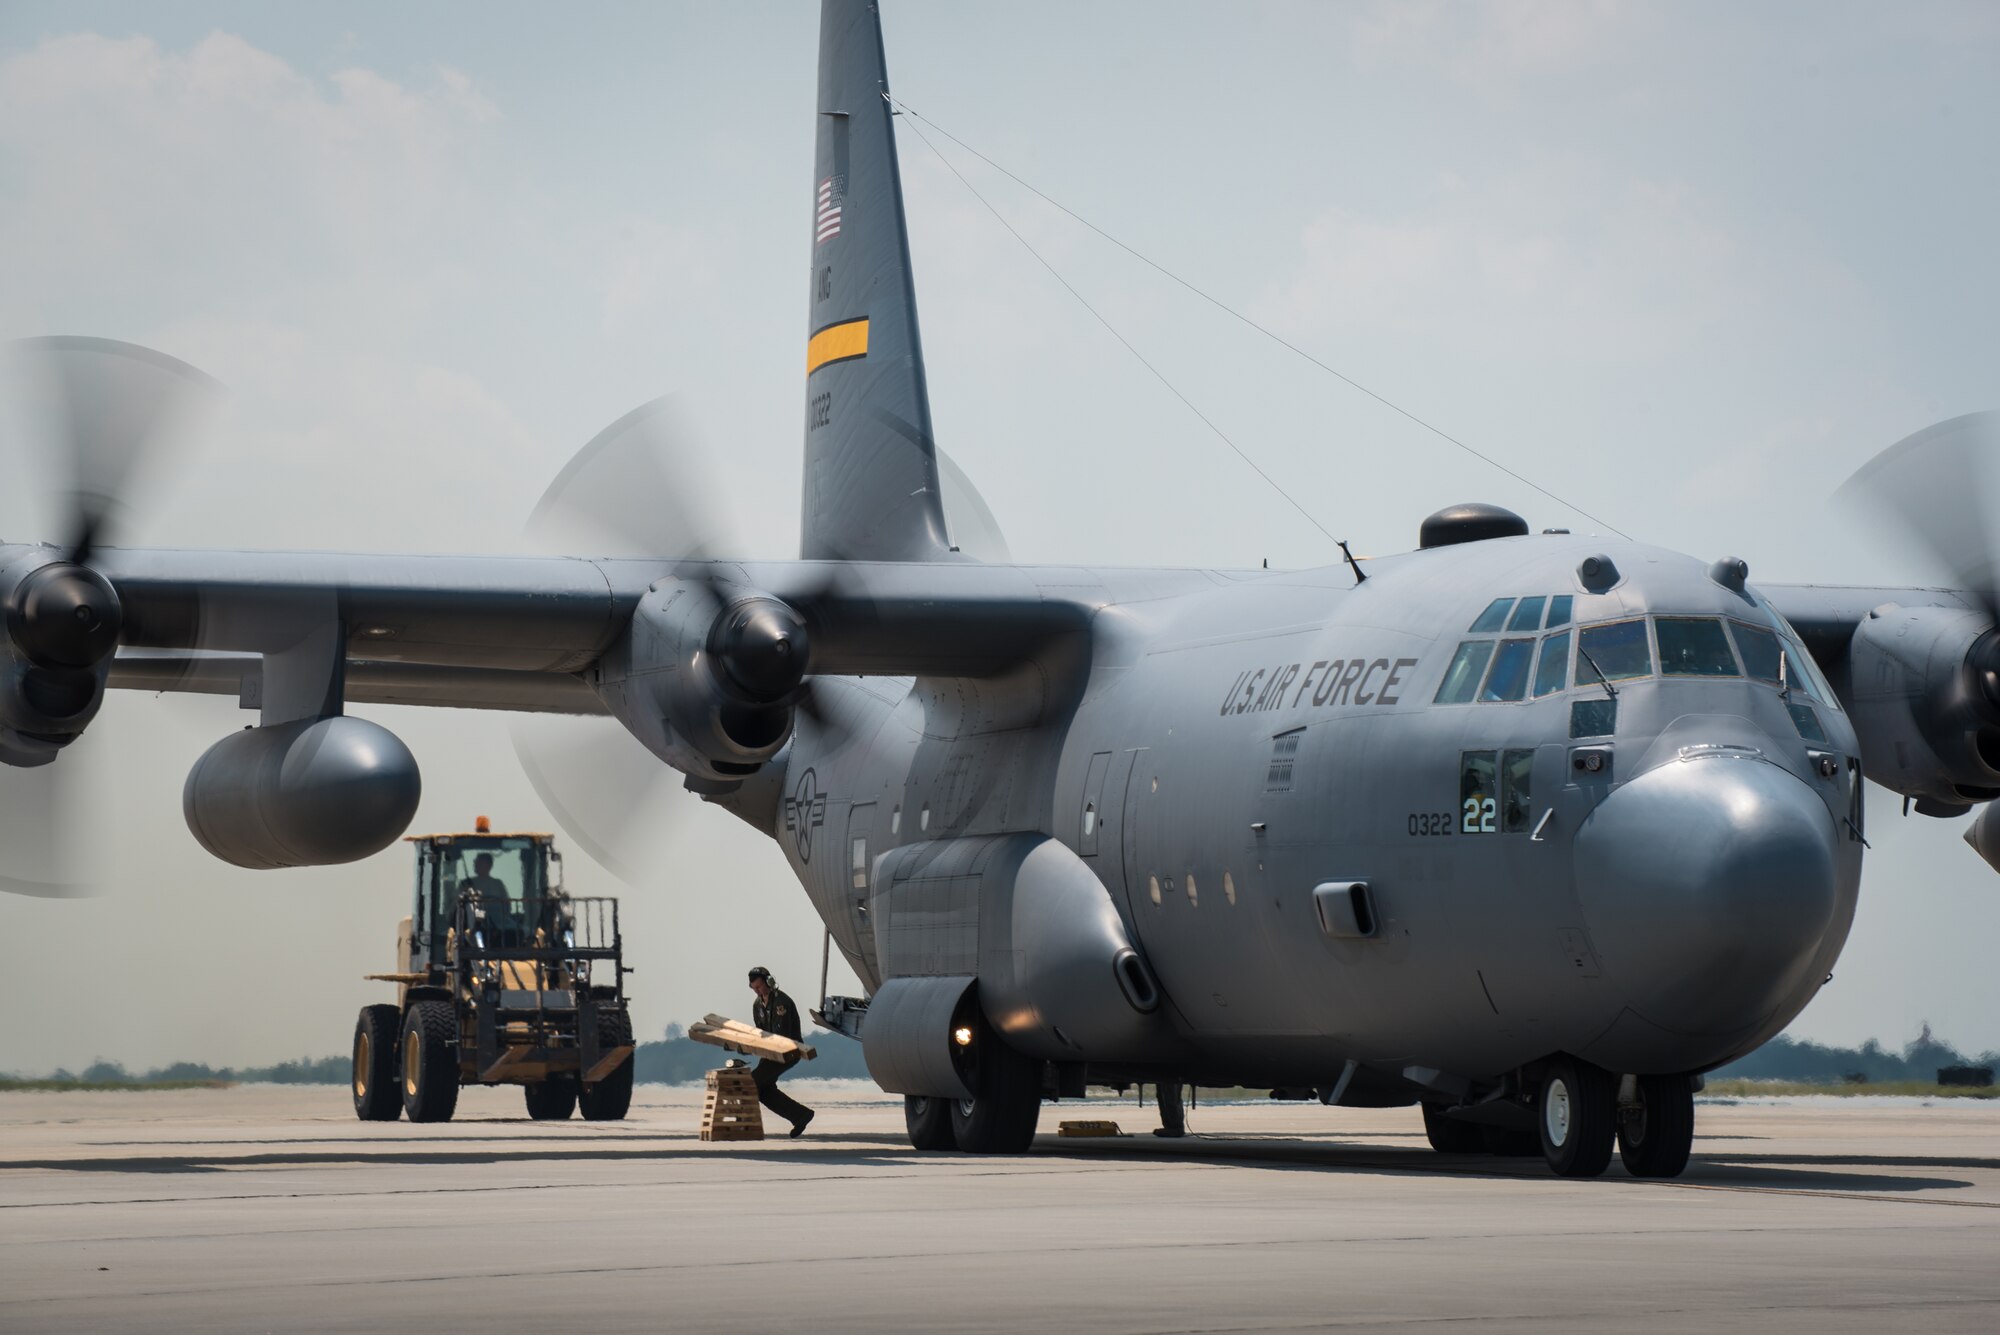 An aerial porter from the Kentucky Air National Guard’s 123rd Airlift Wing waits to offload cargo from a Connecticut Air National Guard C-130 Hercules aircraft at the Air National Guard’s Air Dominance Center in Savannah, Ga., June 13, 2016. Airmen from the Connecticut unit are participating in Maintenance University here, a weeklong course designed to provide intensive instruction in aircraft maintenance. Now in its eighth year, Maintenance University is sponsored by the 123rd Airlift Wing. (U.S. Air National Guard photo by Lt. Col. Dale Greer)